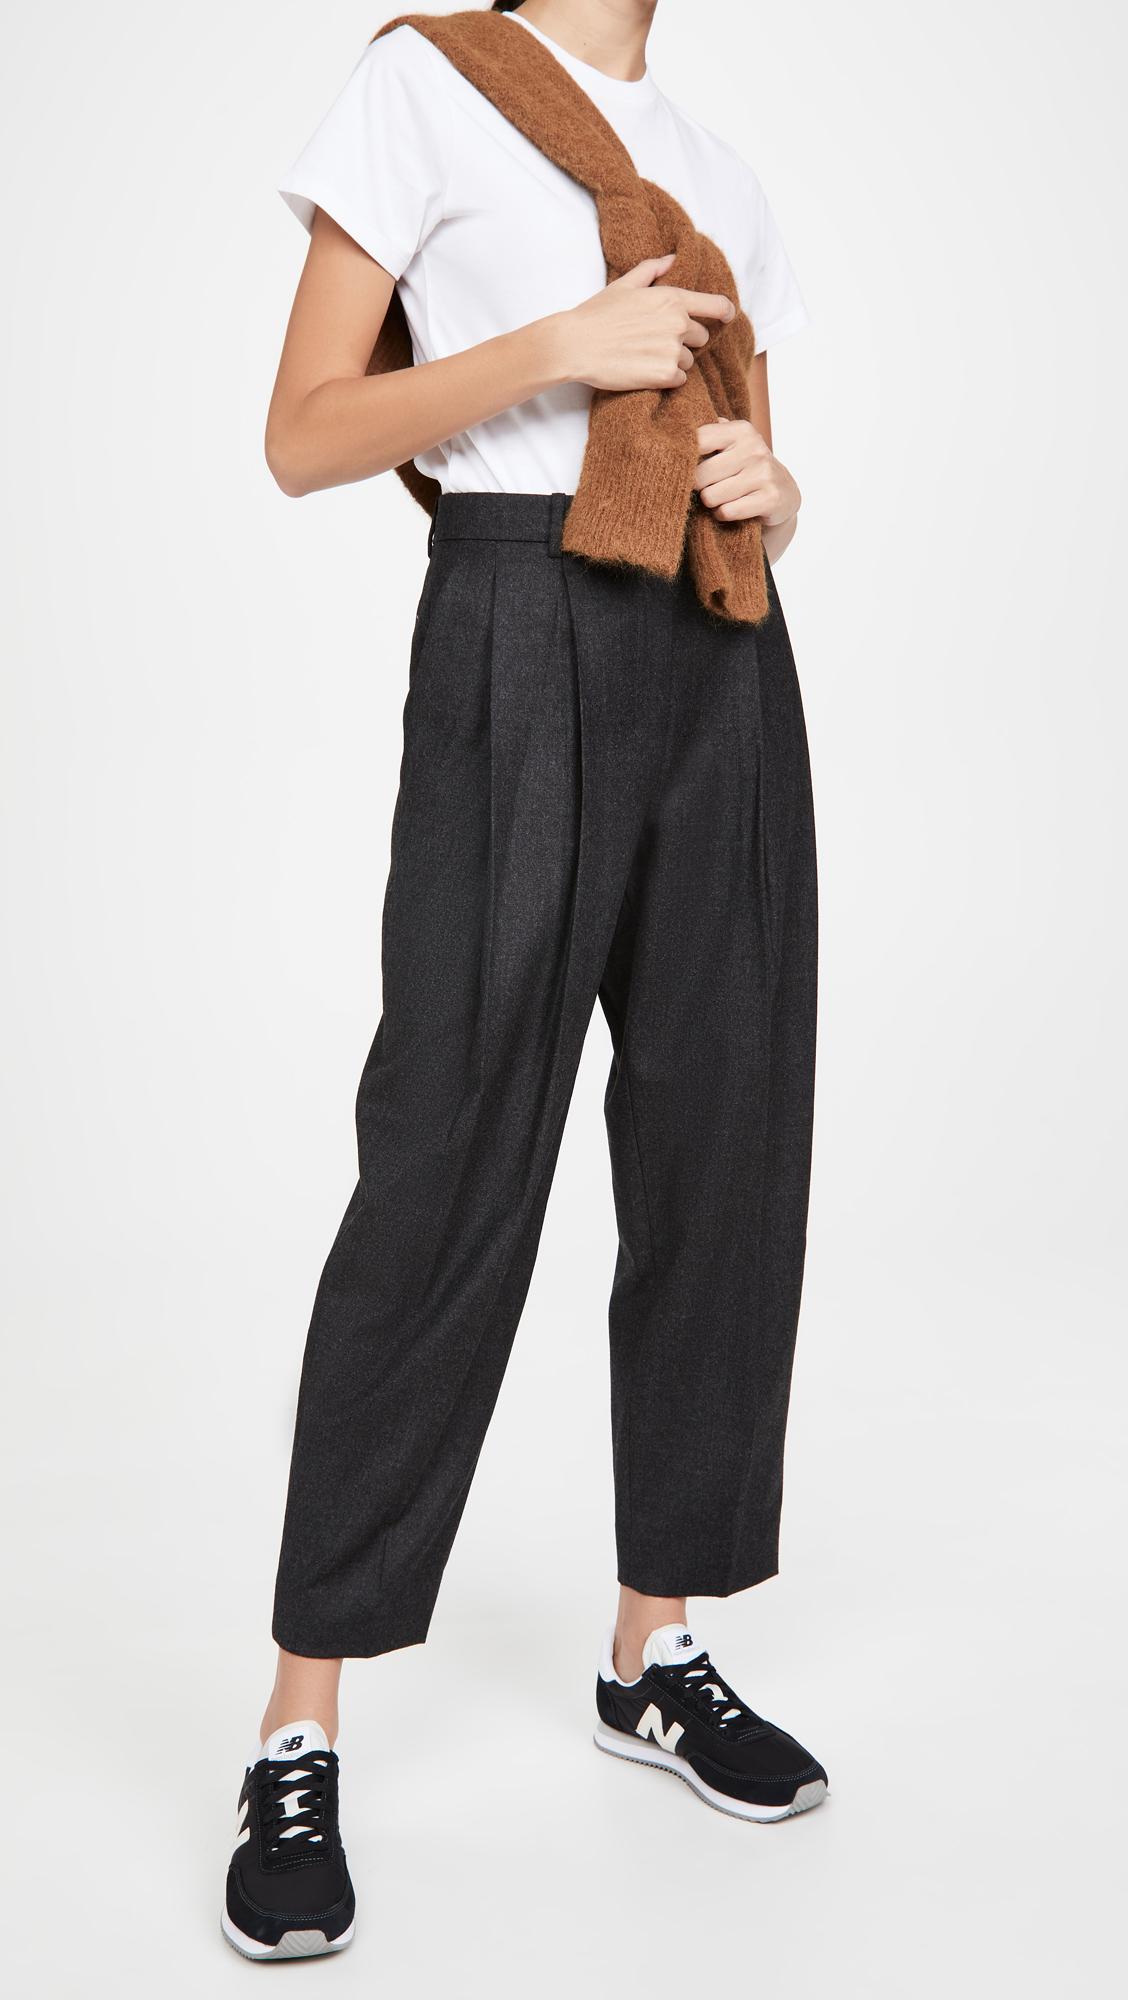 Theory Pleat Carrot Pants in Grey